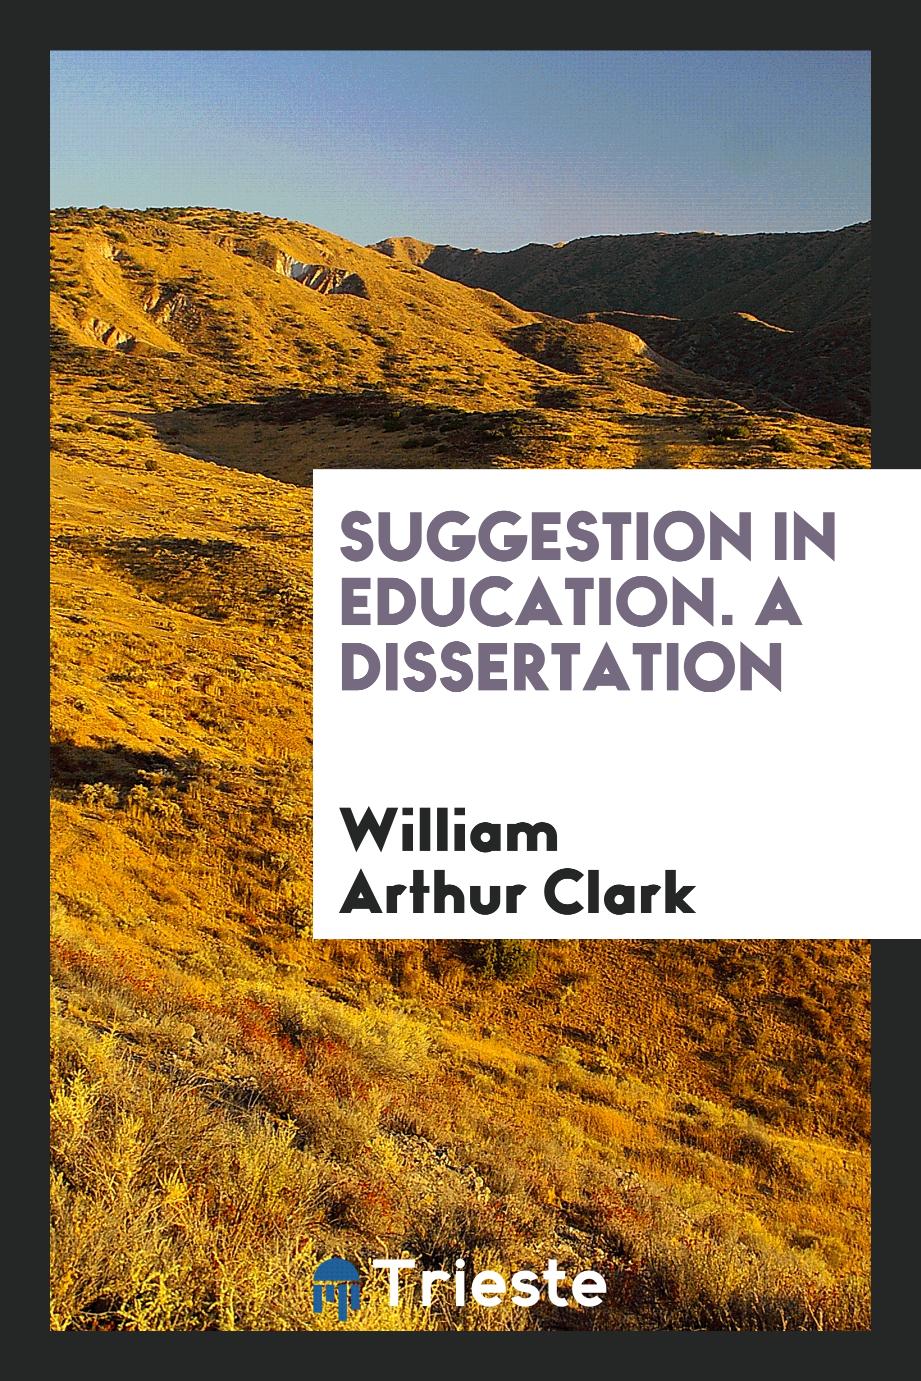 Suggestion in Education. A Dissertation